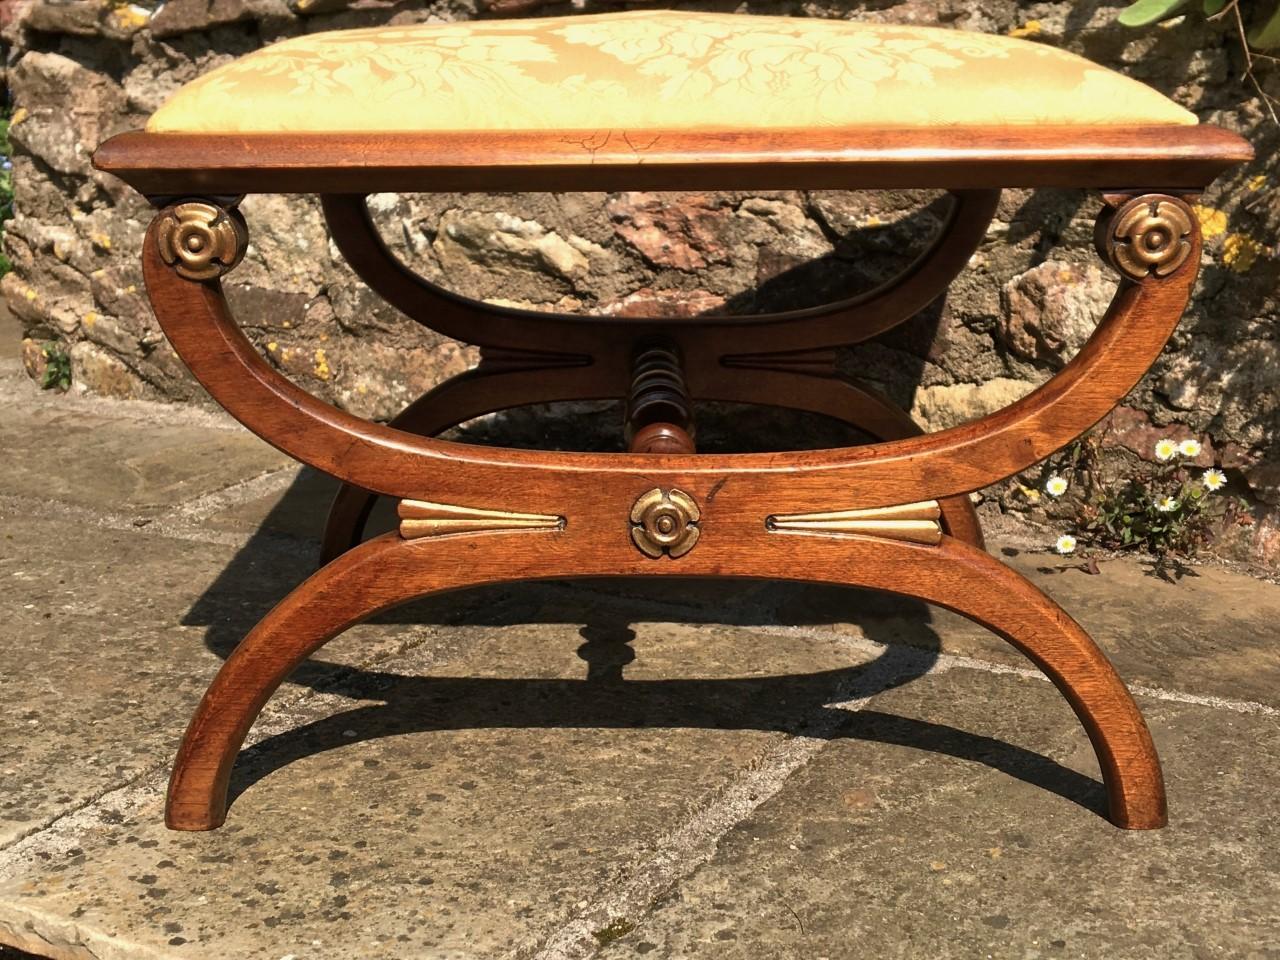 A fine quality antique mahogany X-frame stool from the circa 1890s
This delightful stool has been lightly refurbished, cleaned and wax polished.
We have also had the seat completely upholstered in an attractive French
silk material in keeping with